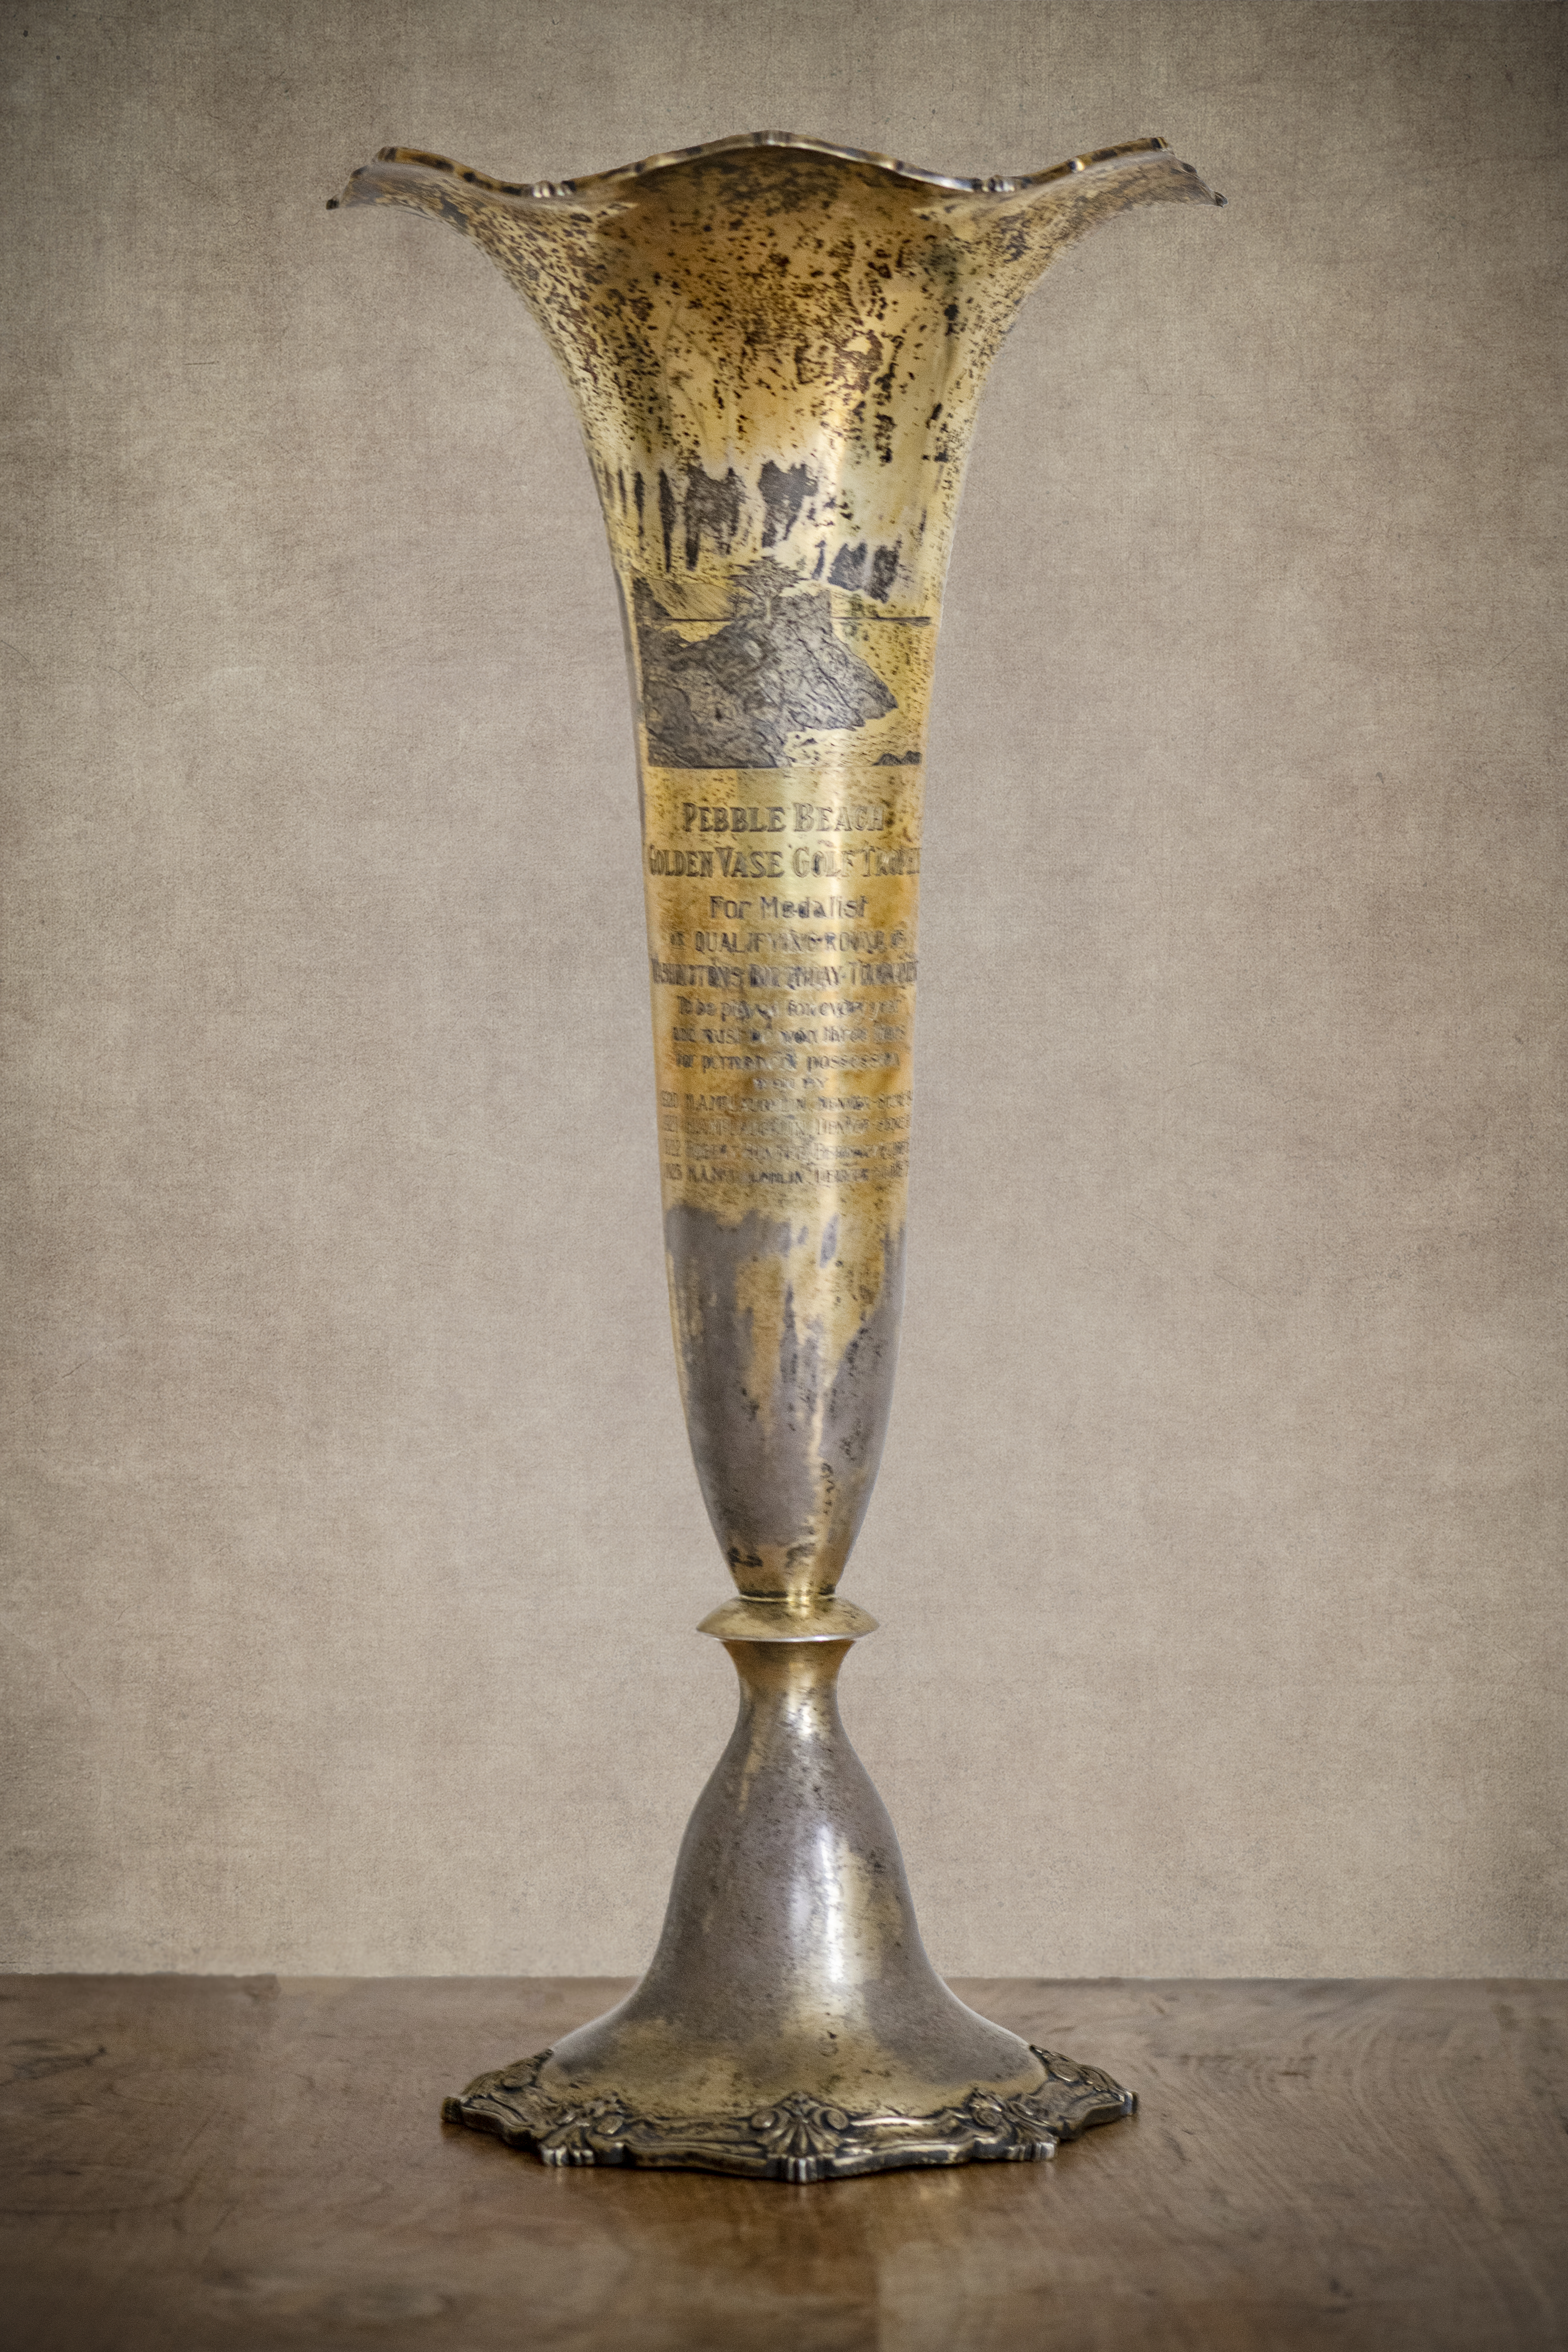 Photo of a tall slender silver-plated vase, showing some tarnish around the base. It has an image of a cypress tree on it, and is the original trophy presented to the winner of the Pebble Beach Golf Tournament, which began in 1920. The inscription shows that M.A.McLaughlin won the trophy in 1920, 1921, and 1923. A Robert Hunter won it in 1922.